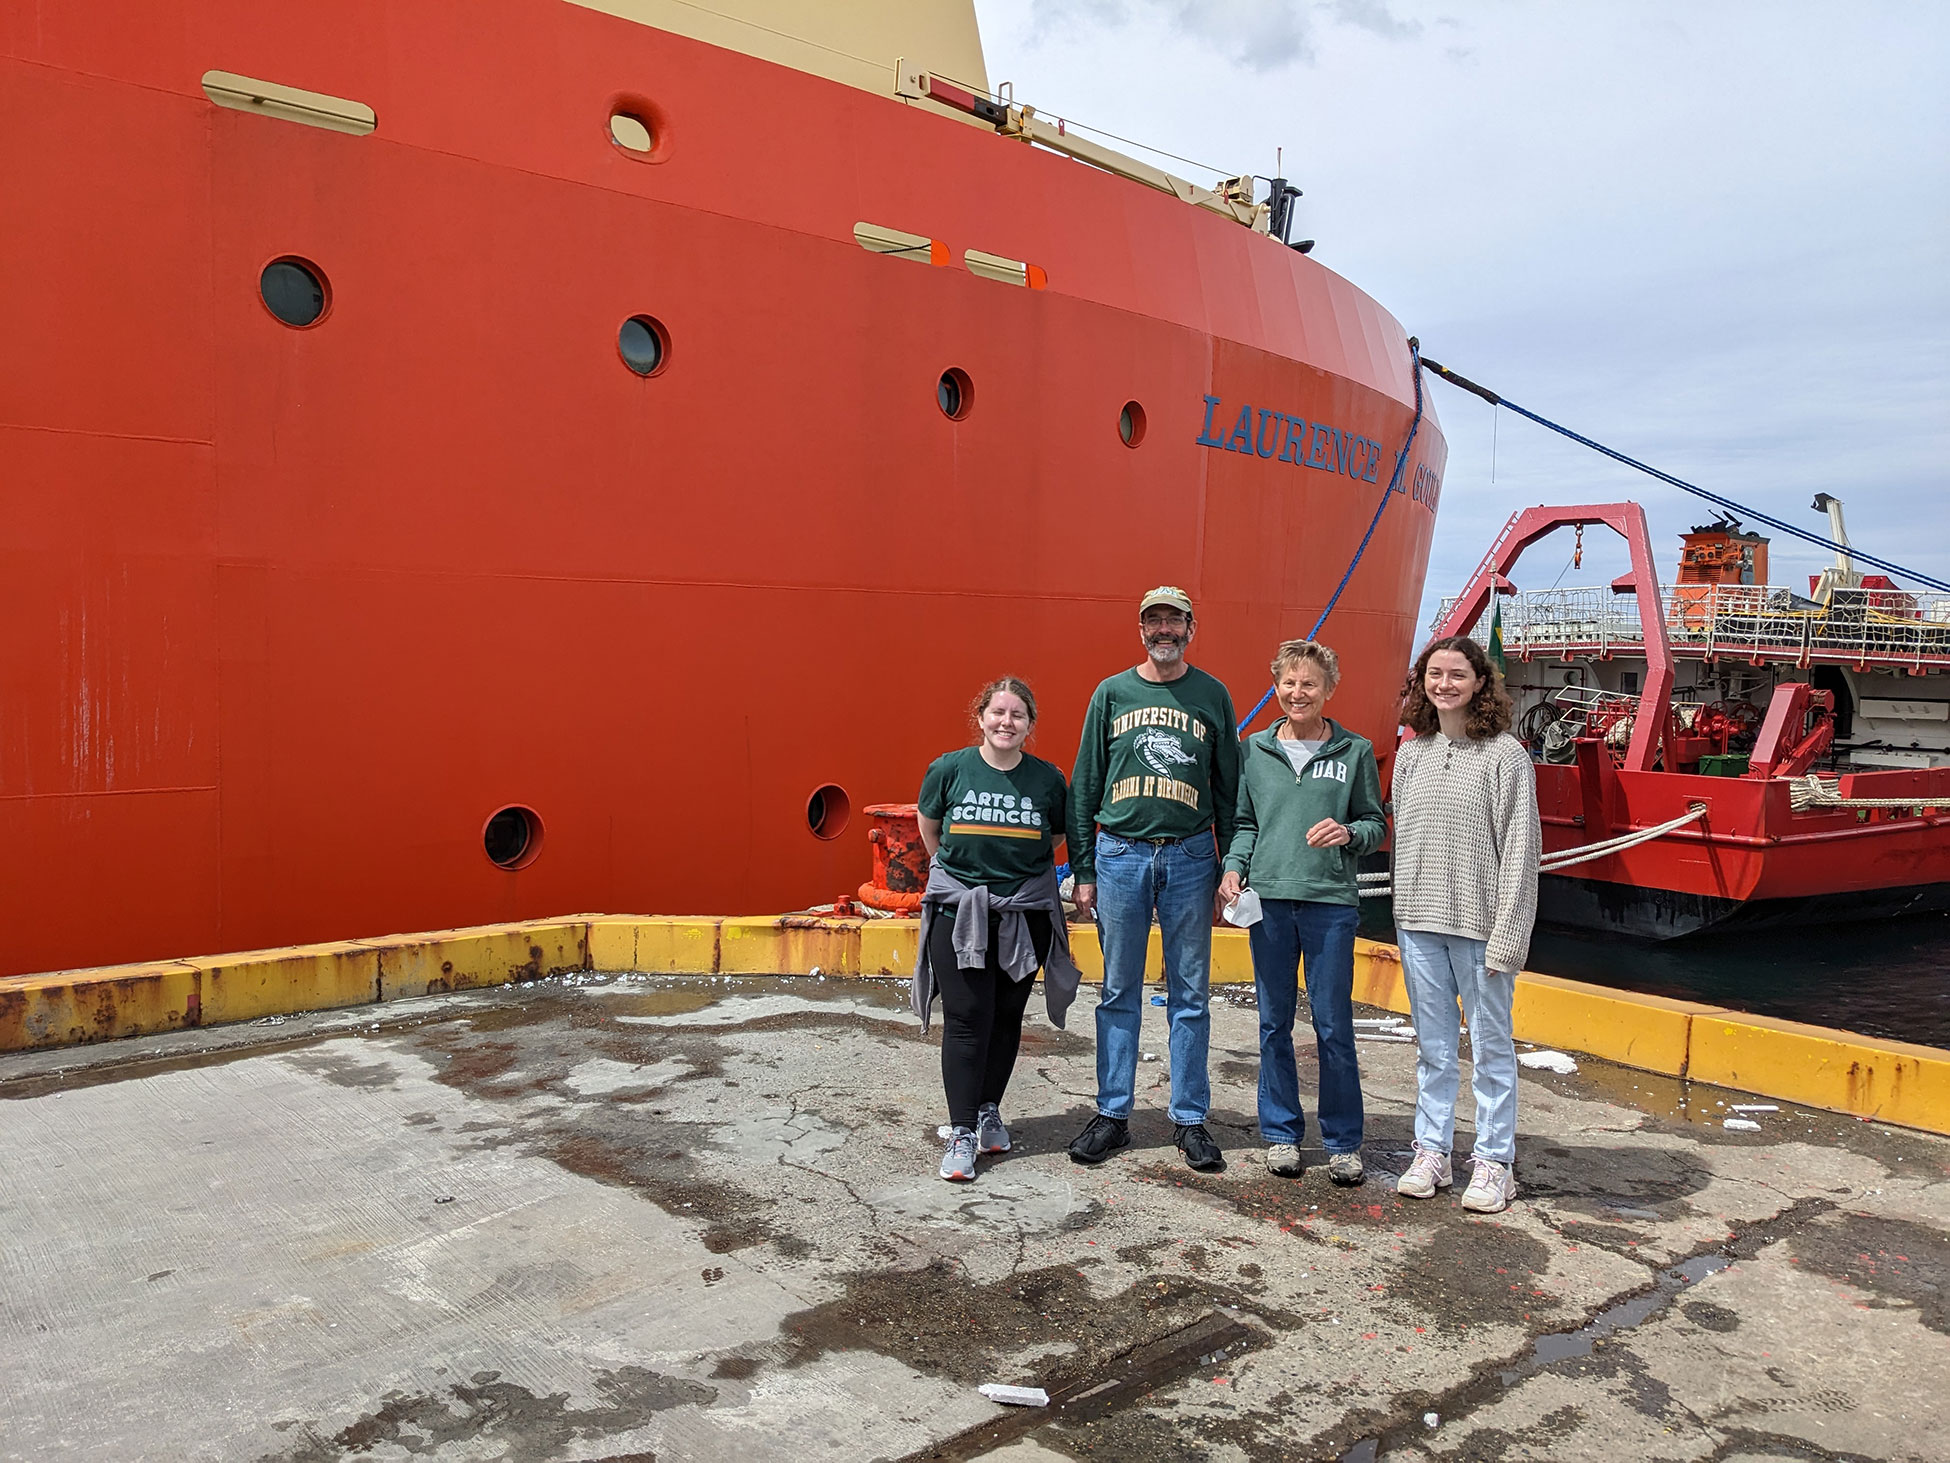 Addie, Chuck, Maggie, Hannah standing on the concrete dock in front of the bright orange hull of the Laurence M. Gould.